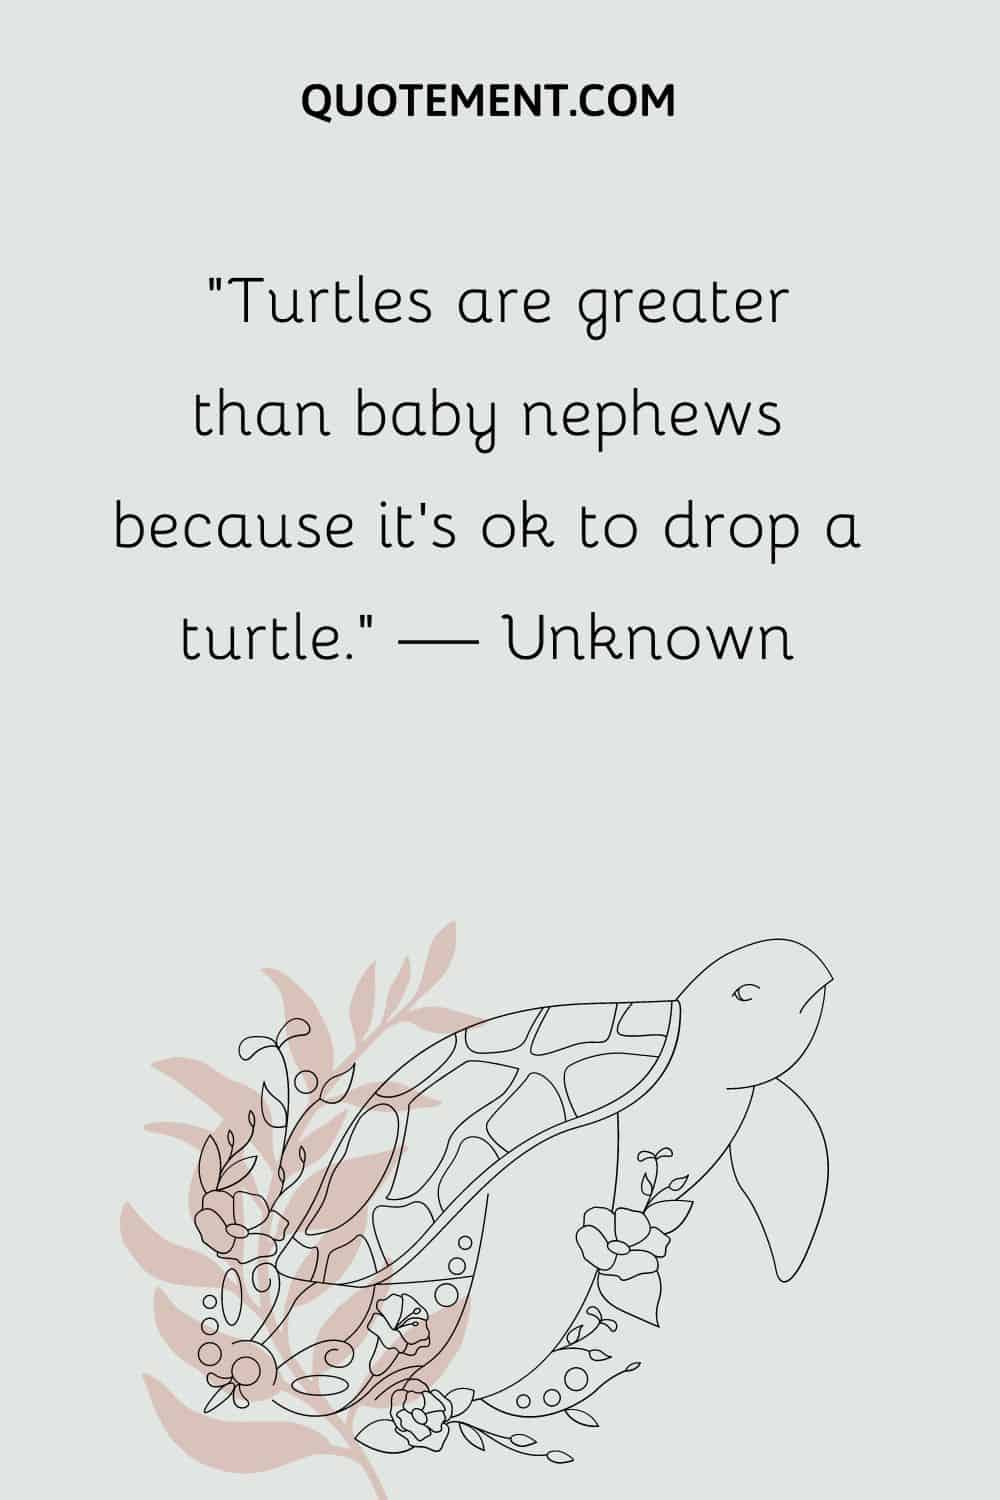 Turtles are greater than baby nephews because it’s ok to drop a turtle